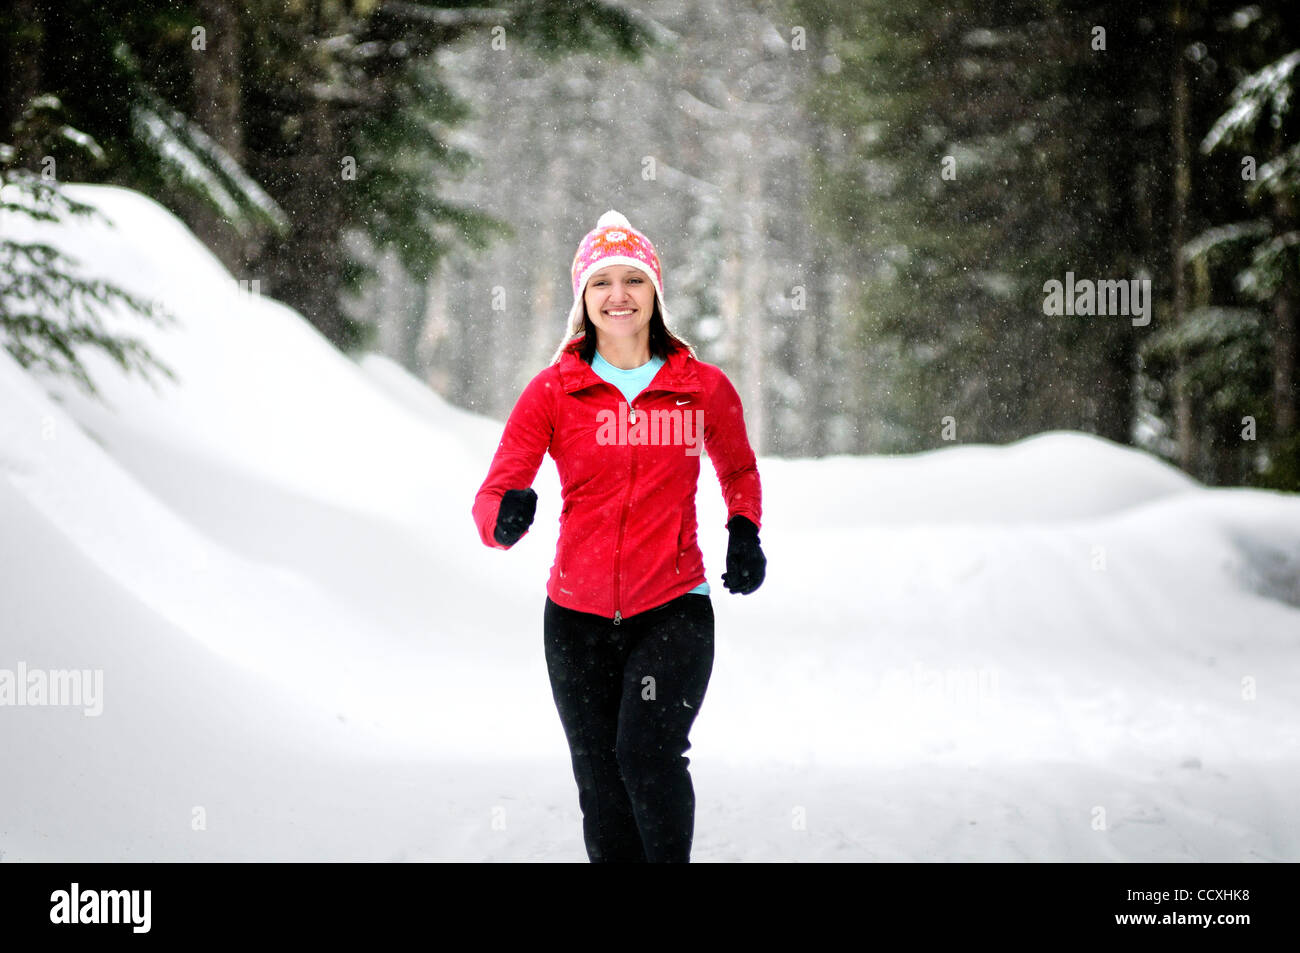 Apr. 01, 2010 - Spokane, Washington, USA - Linda Lilard is an elite runner with the running club Team Swift based out of Spokane, Washington. She runs at Mt. Spokane Ski Resort on a snowy spring day dressed in winter running gear and running through evergreen trees, snow, trails on a cloudy winter l Stock Photo